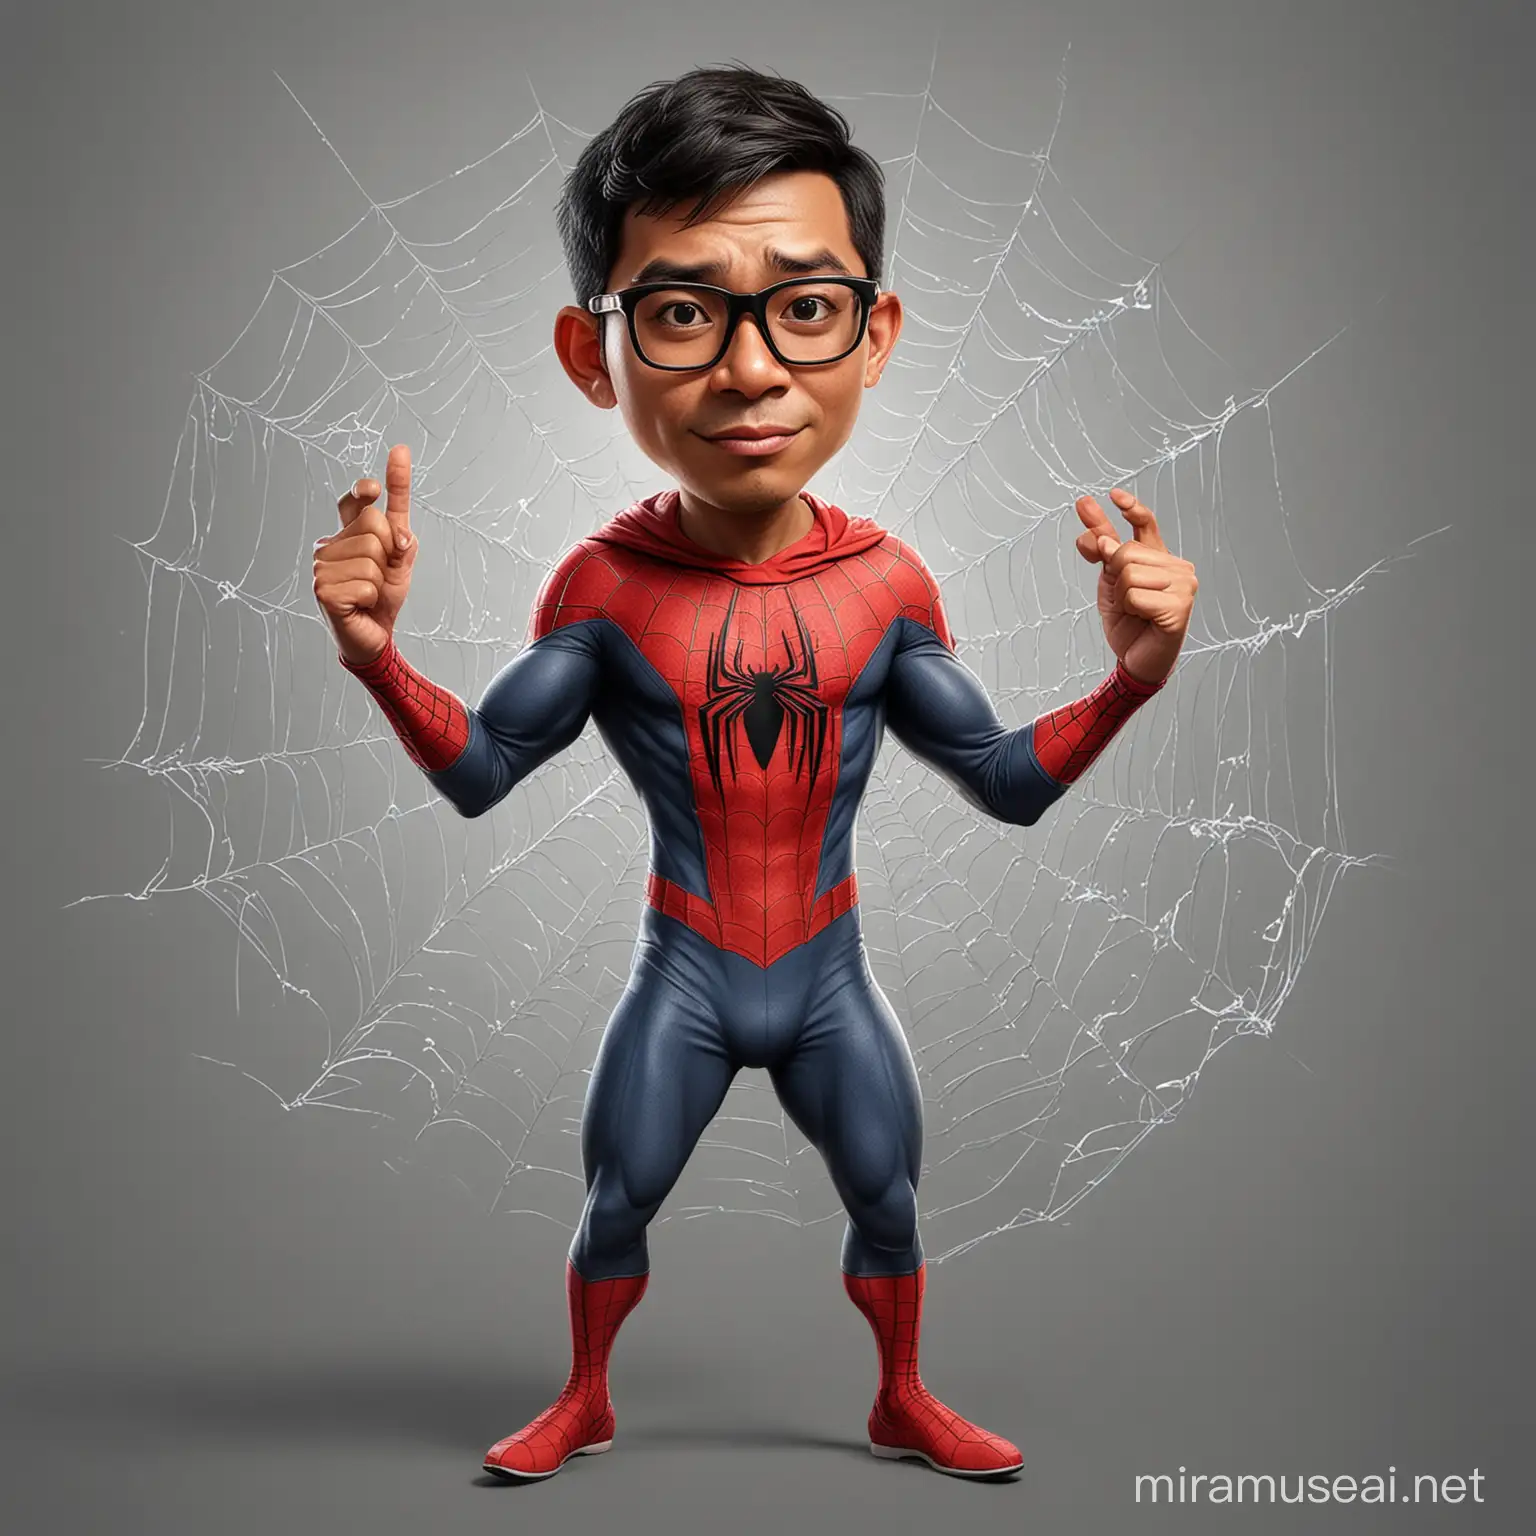 caricature potrait full body, A 29 year old Indonesian man, short thin hair, big head, wearing glasses, wearing a spiderman outfit, Pulling out a spider web on his finger, realistic